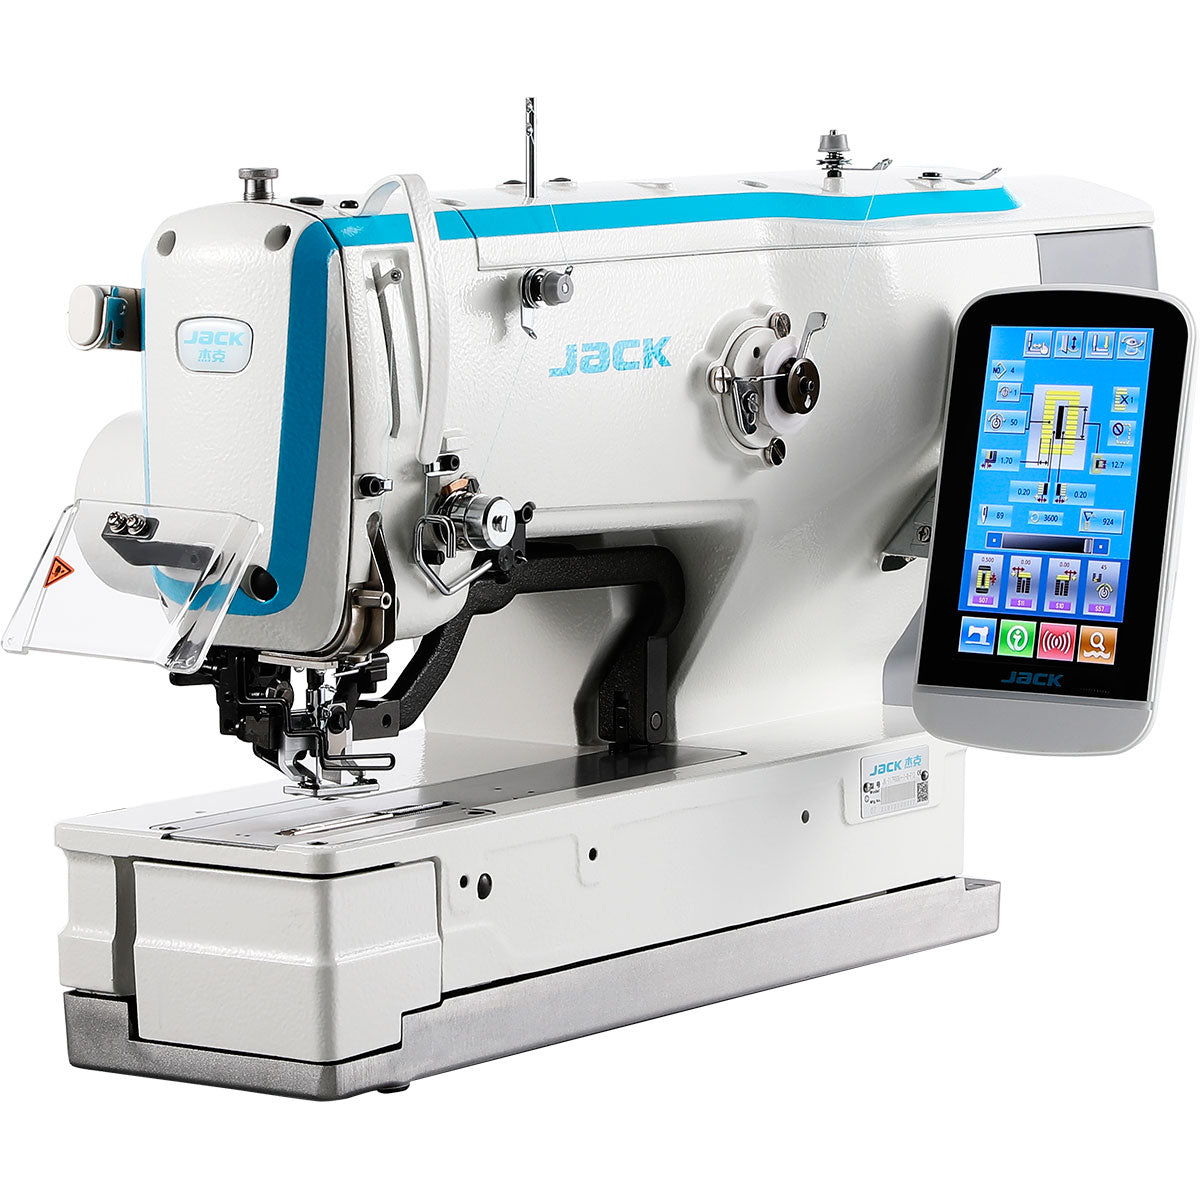 JACK JK-T1790GS-1-D Mechanical Digital Buttonhole Sewing Machine Assembled with Table and Stand Included